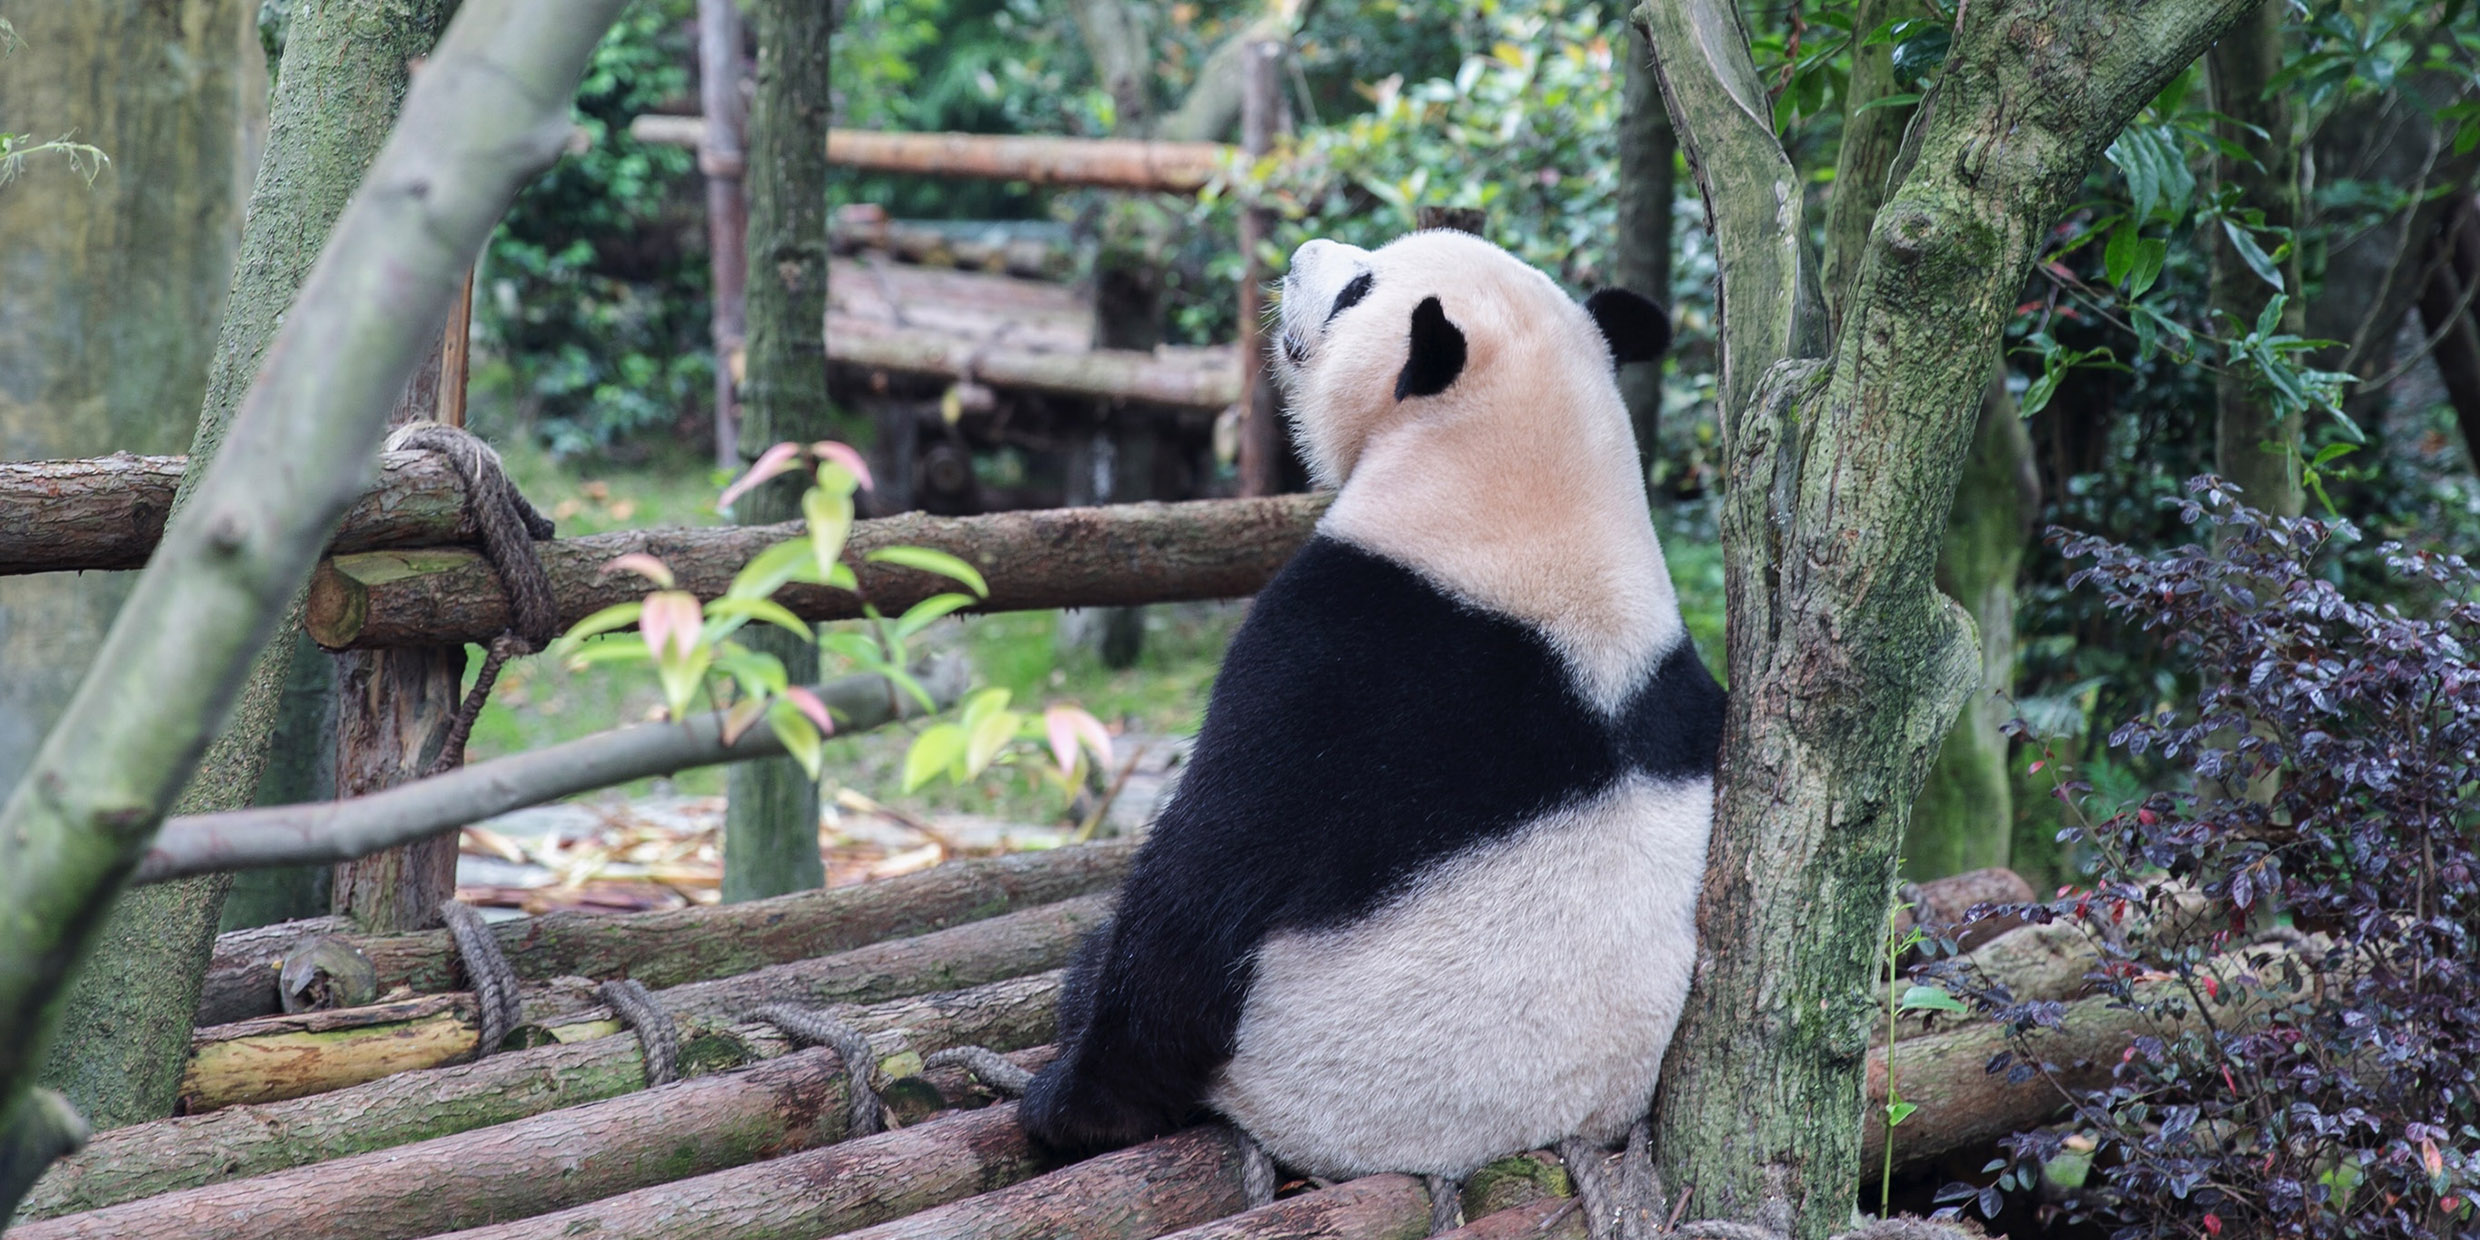 Giant panda’s a bear after all